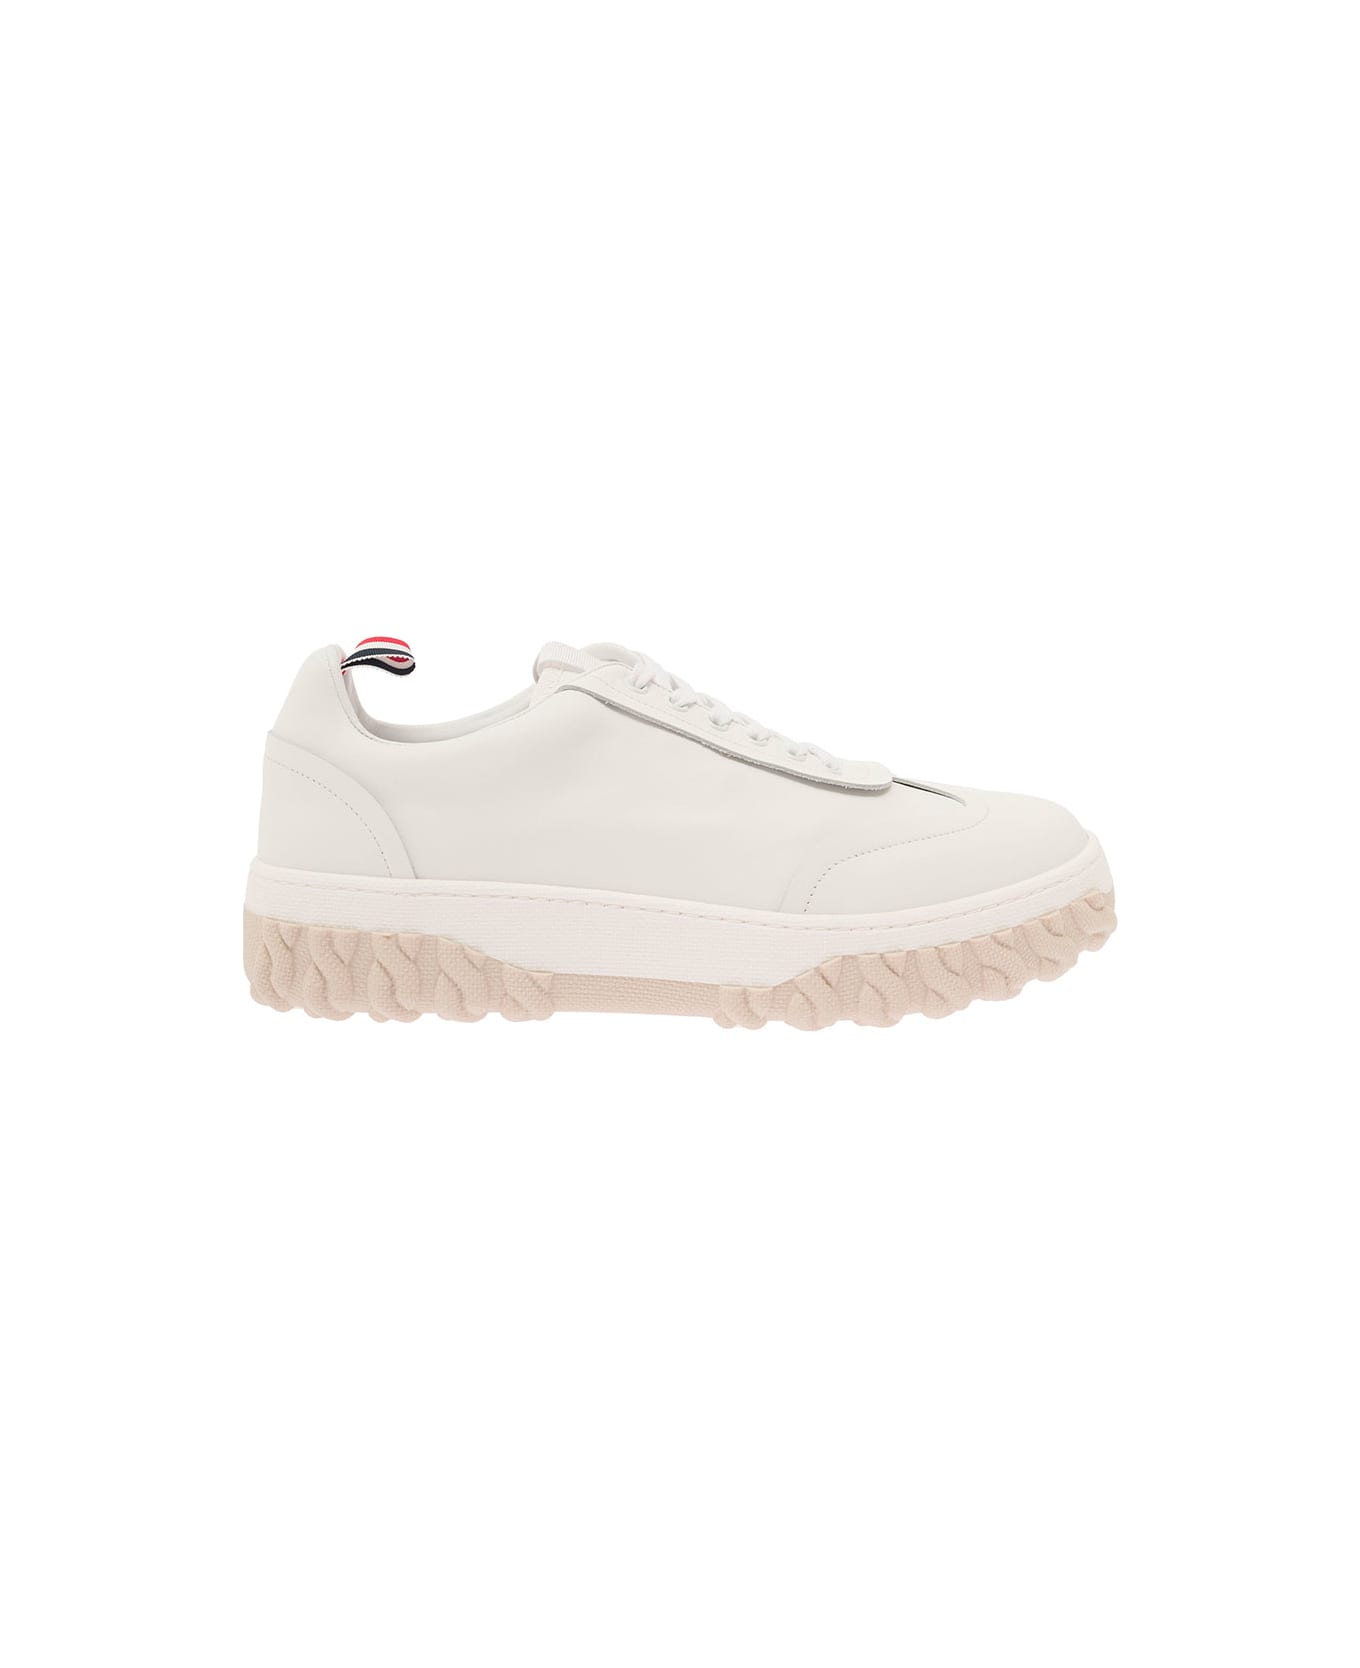 Thom Browne Field Shoe W/ Raw Edge On Cable Knit Sole In Vitello Calf Leather - WHITE